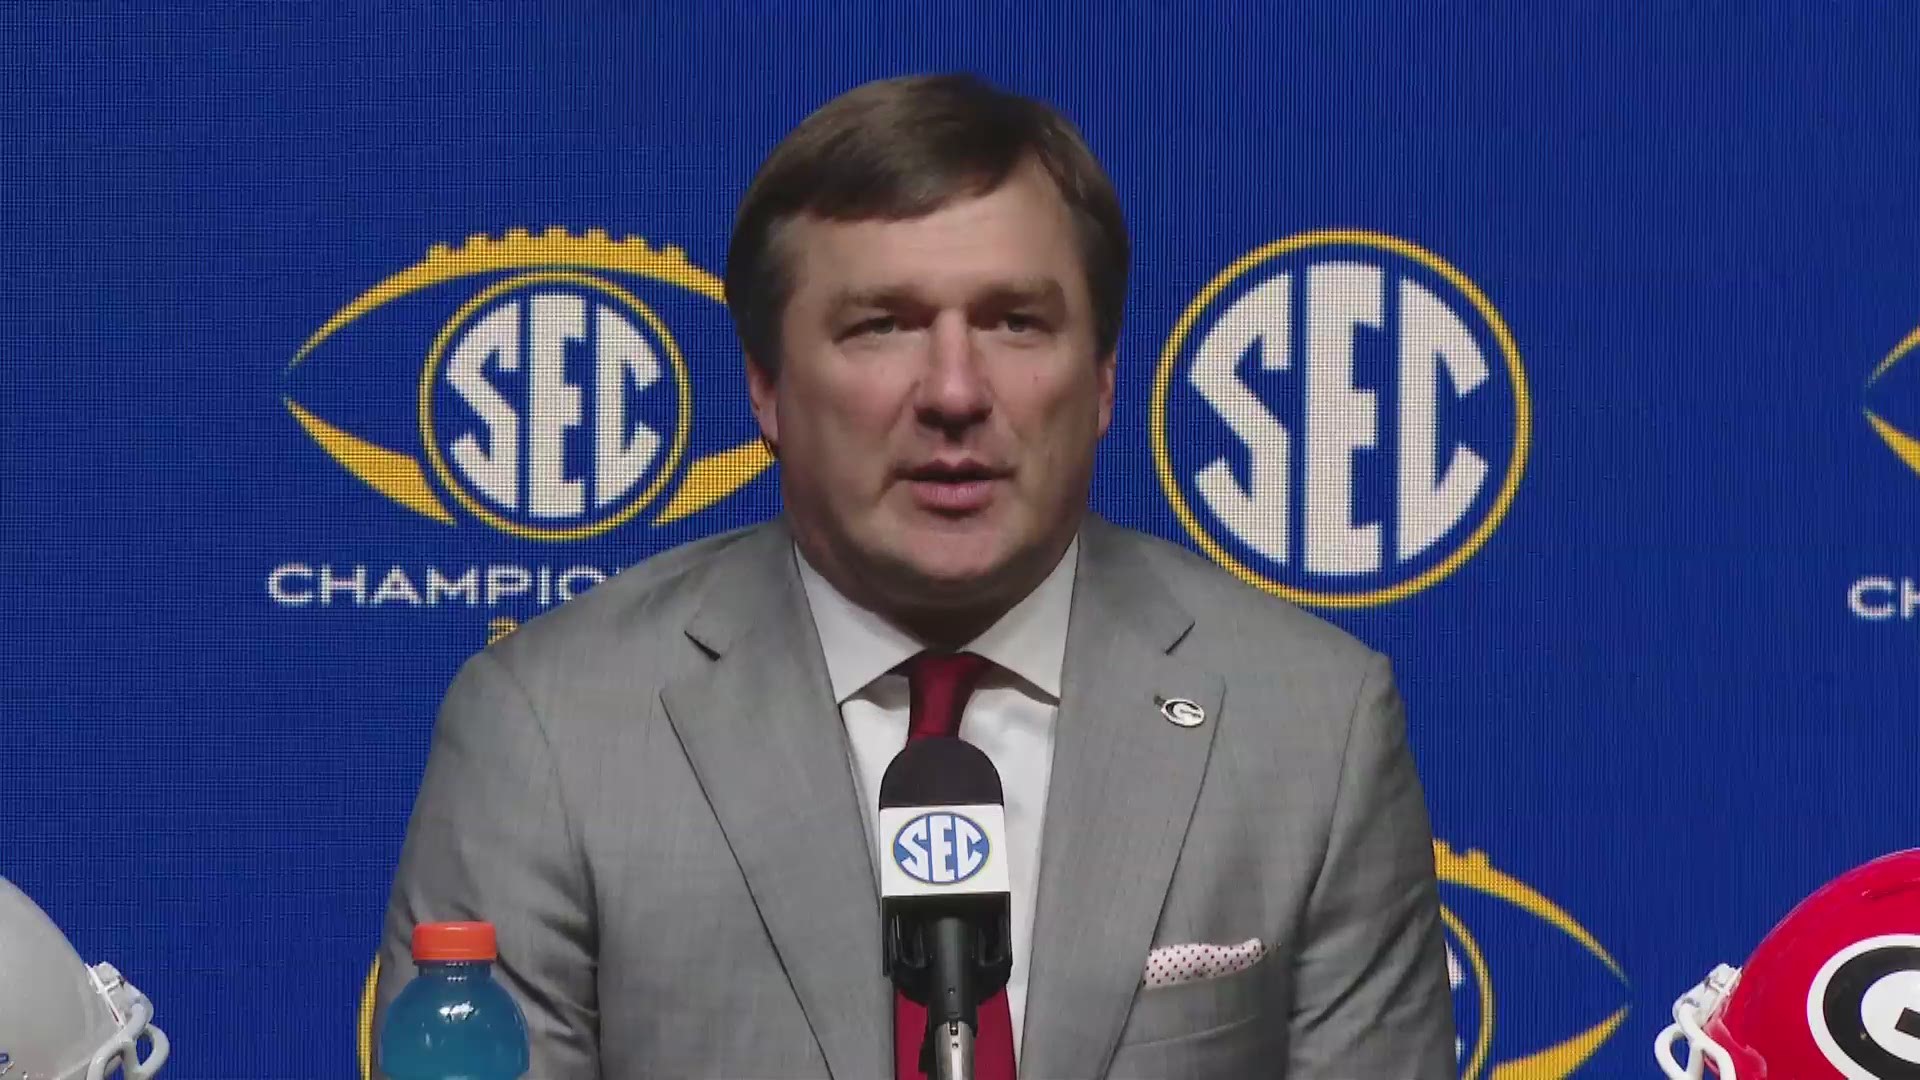 Georgia Bulldogs football head coach Kirby Smart spoke to the media before the SEC Championship game in Atlanta. UGA faces the LSU Tigers for the SEC title